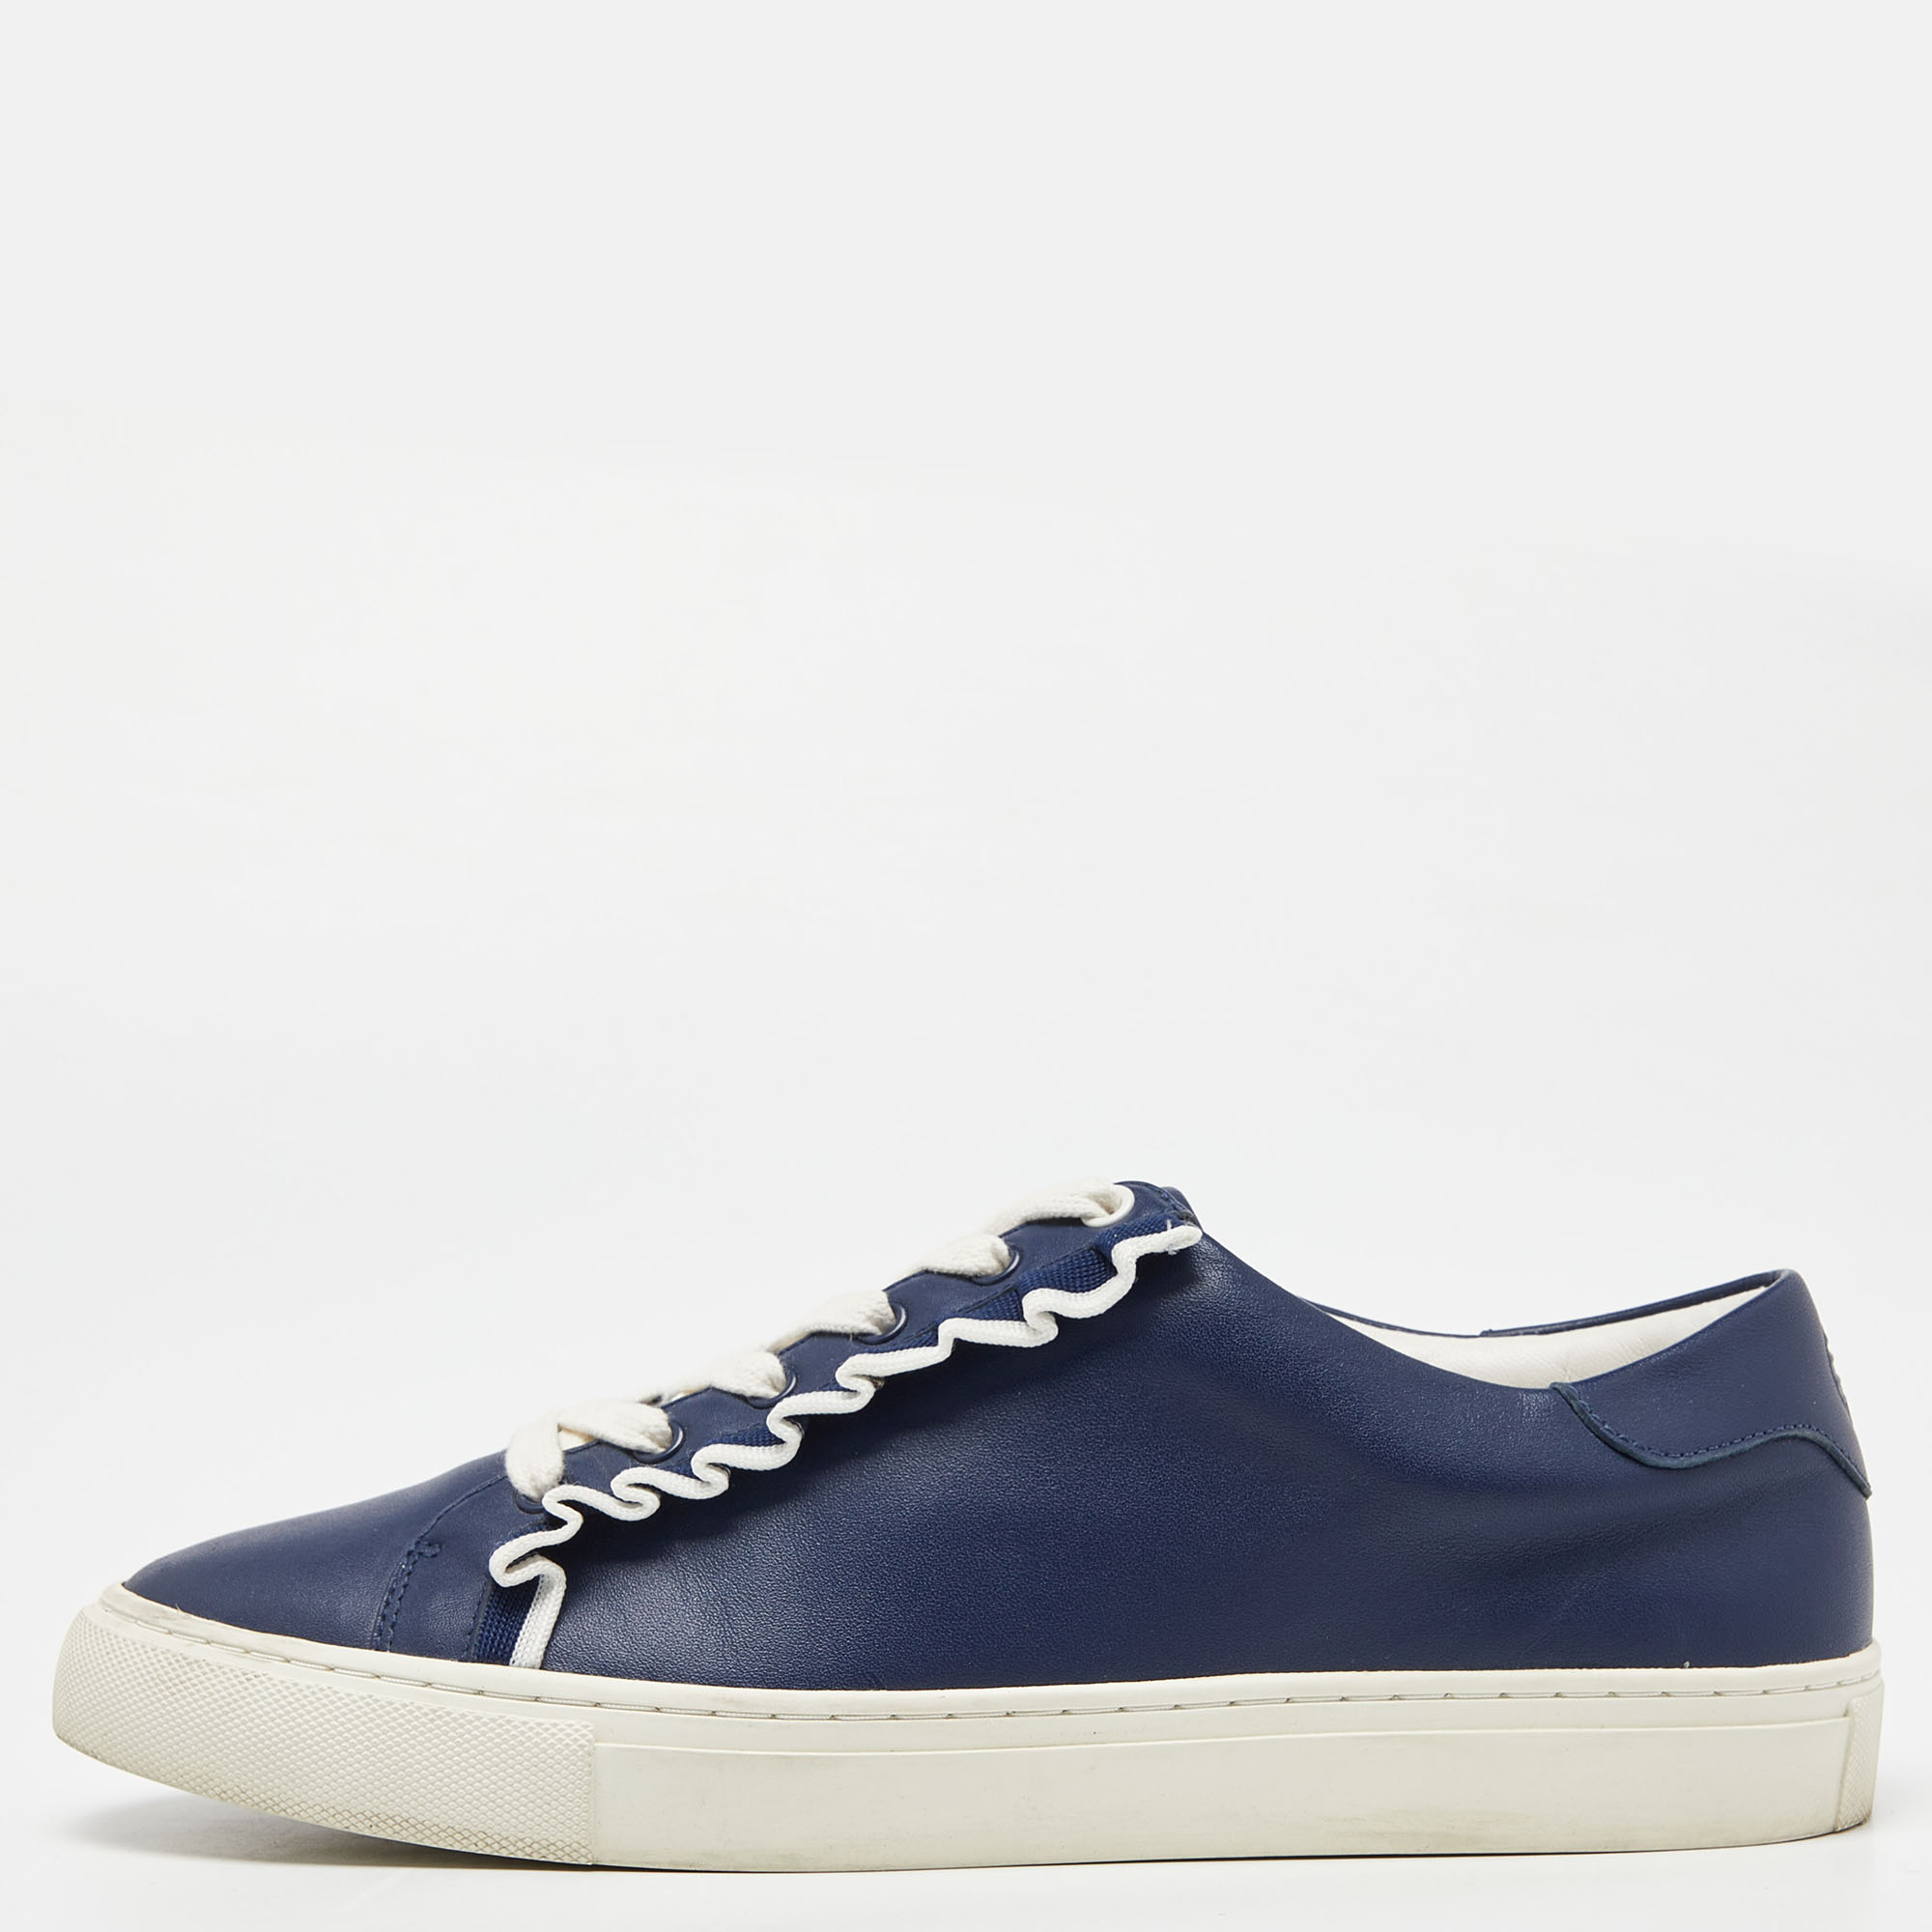 

Tory Burch Blue Leather Low Top Sneakers Size